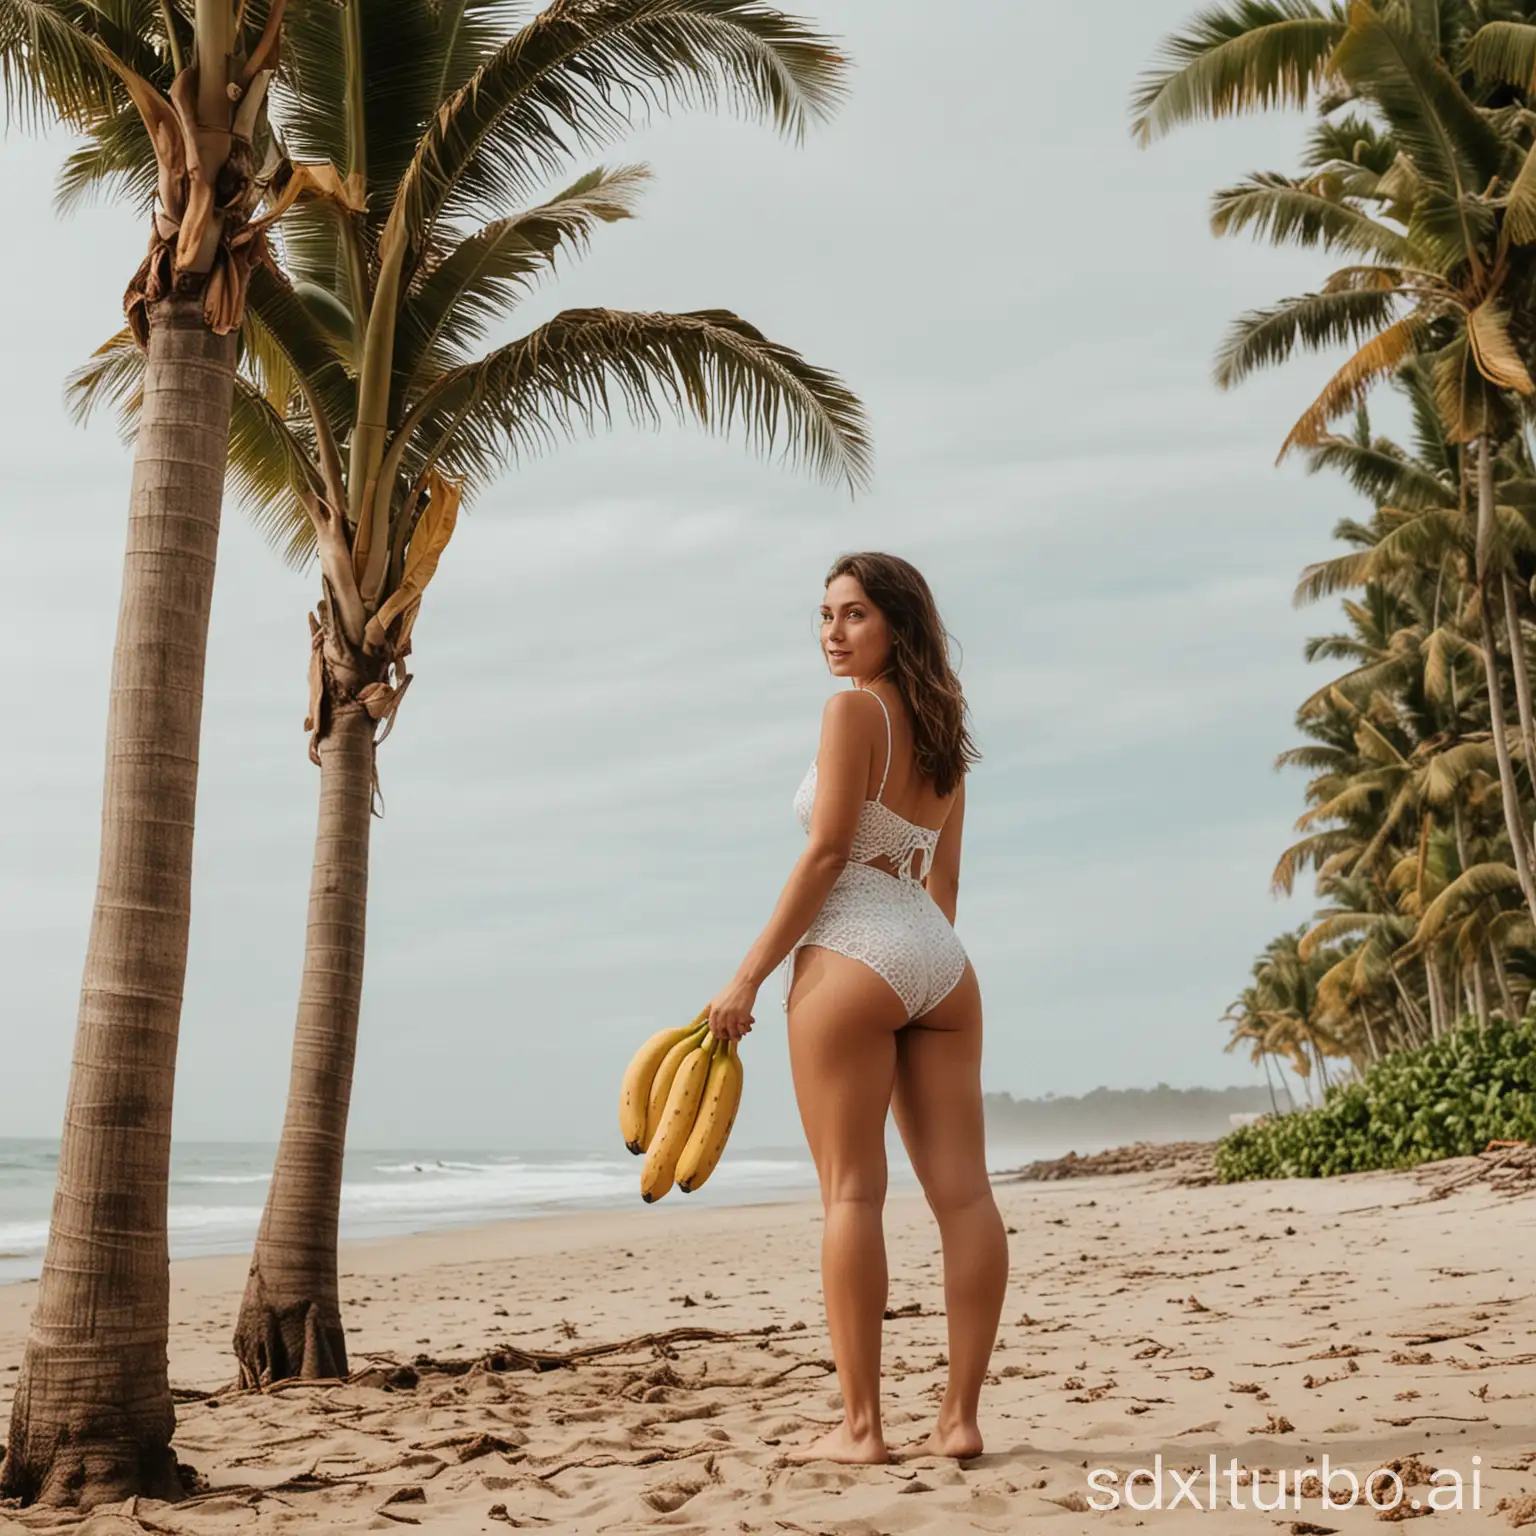 Woman-Standing-on-Beach-with-Banana-Trees-in-Tropical-Setting